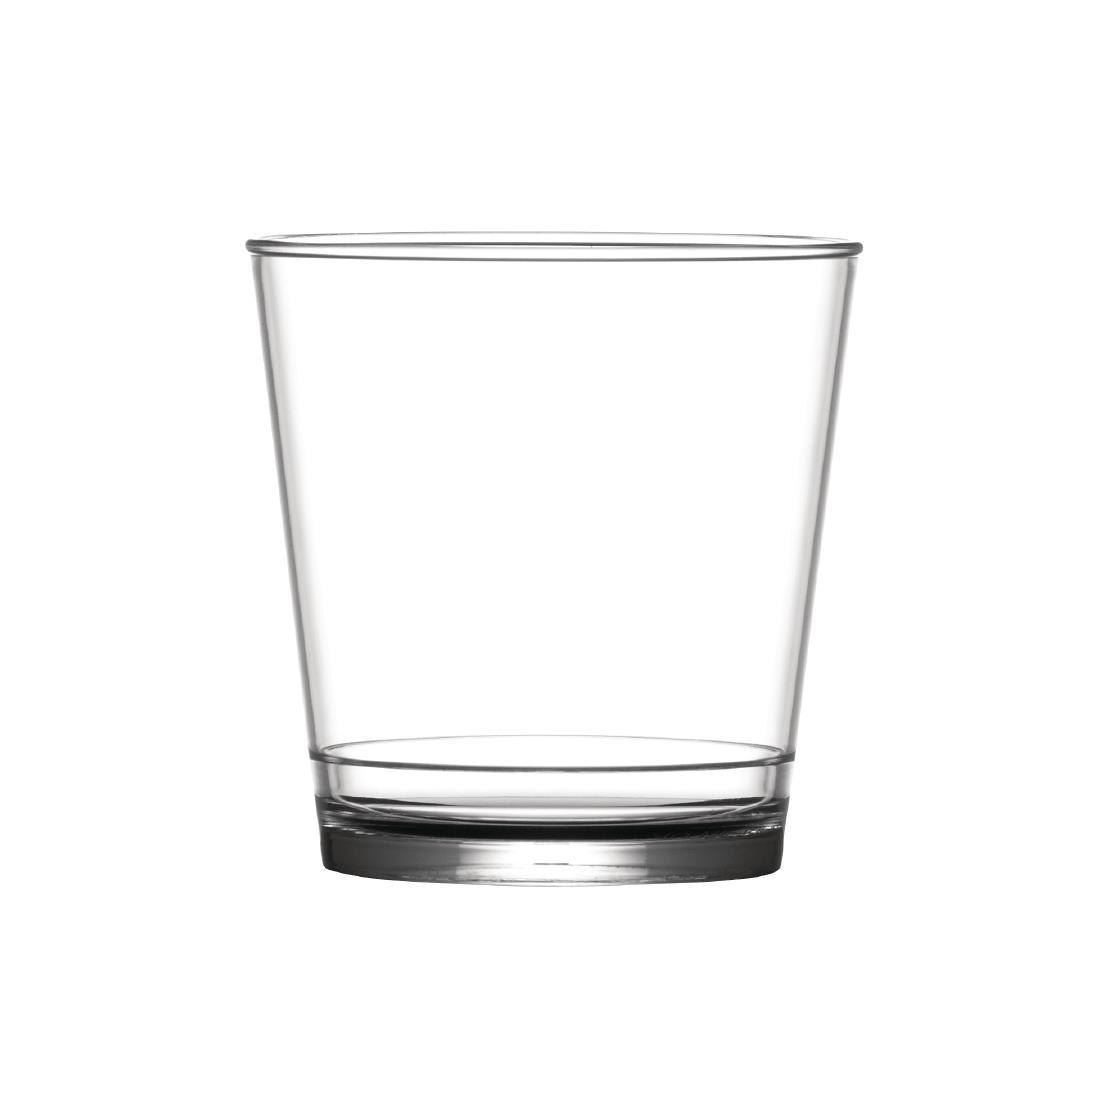 BBP Polycarbonate In2Stax Whisky Rocks Glasses 256ml (Pack of 48) - DC422  - 1